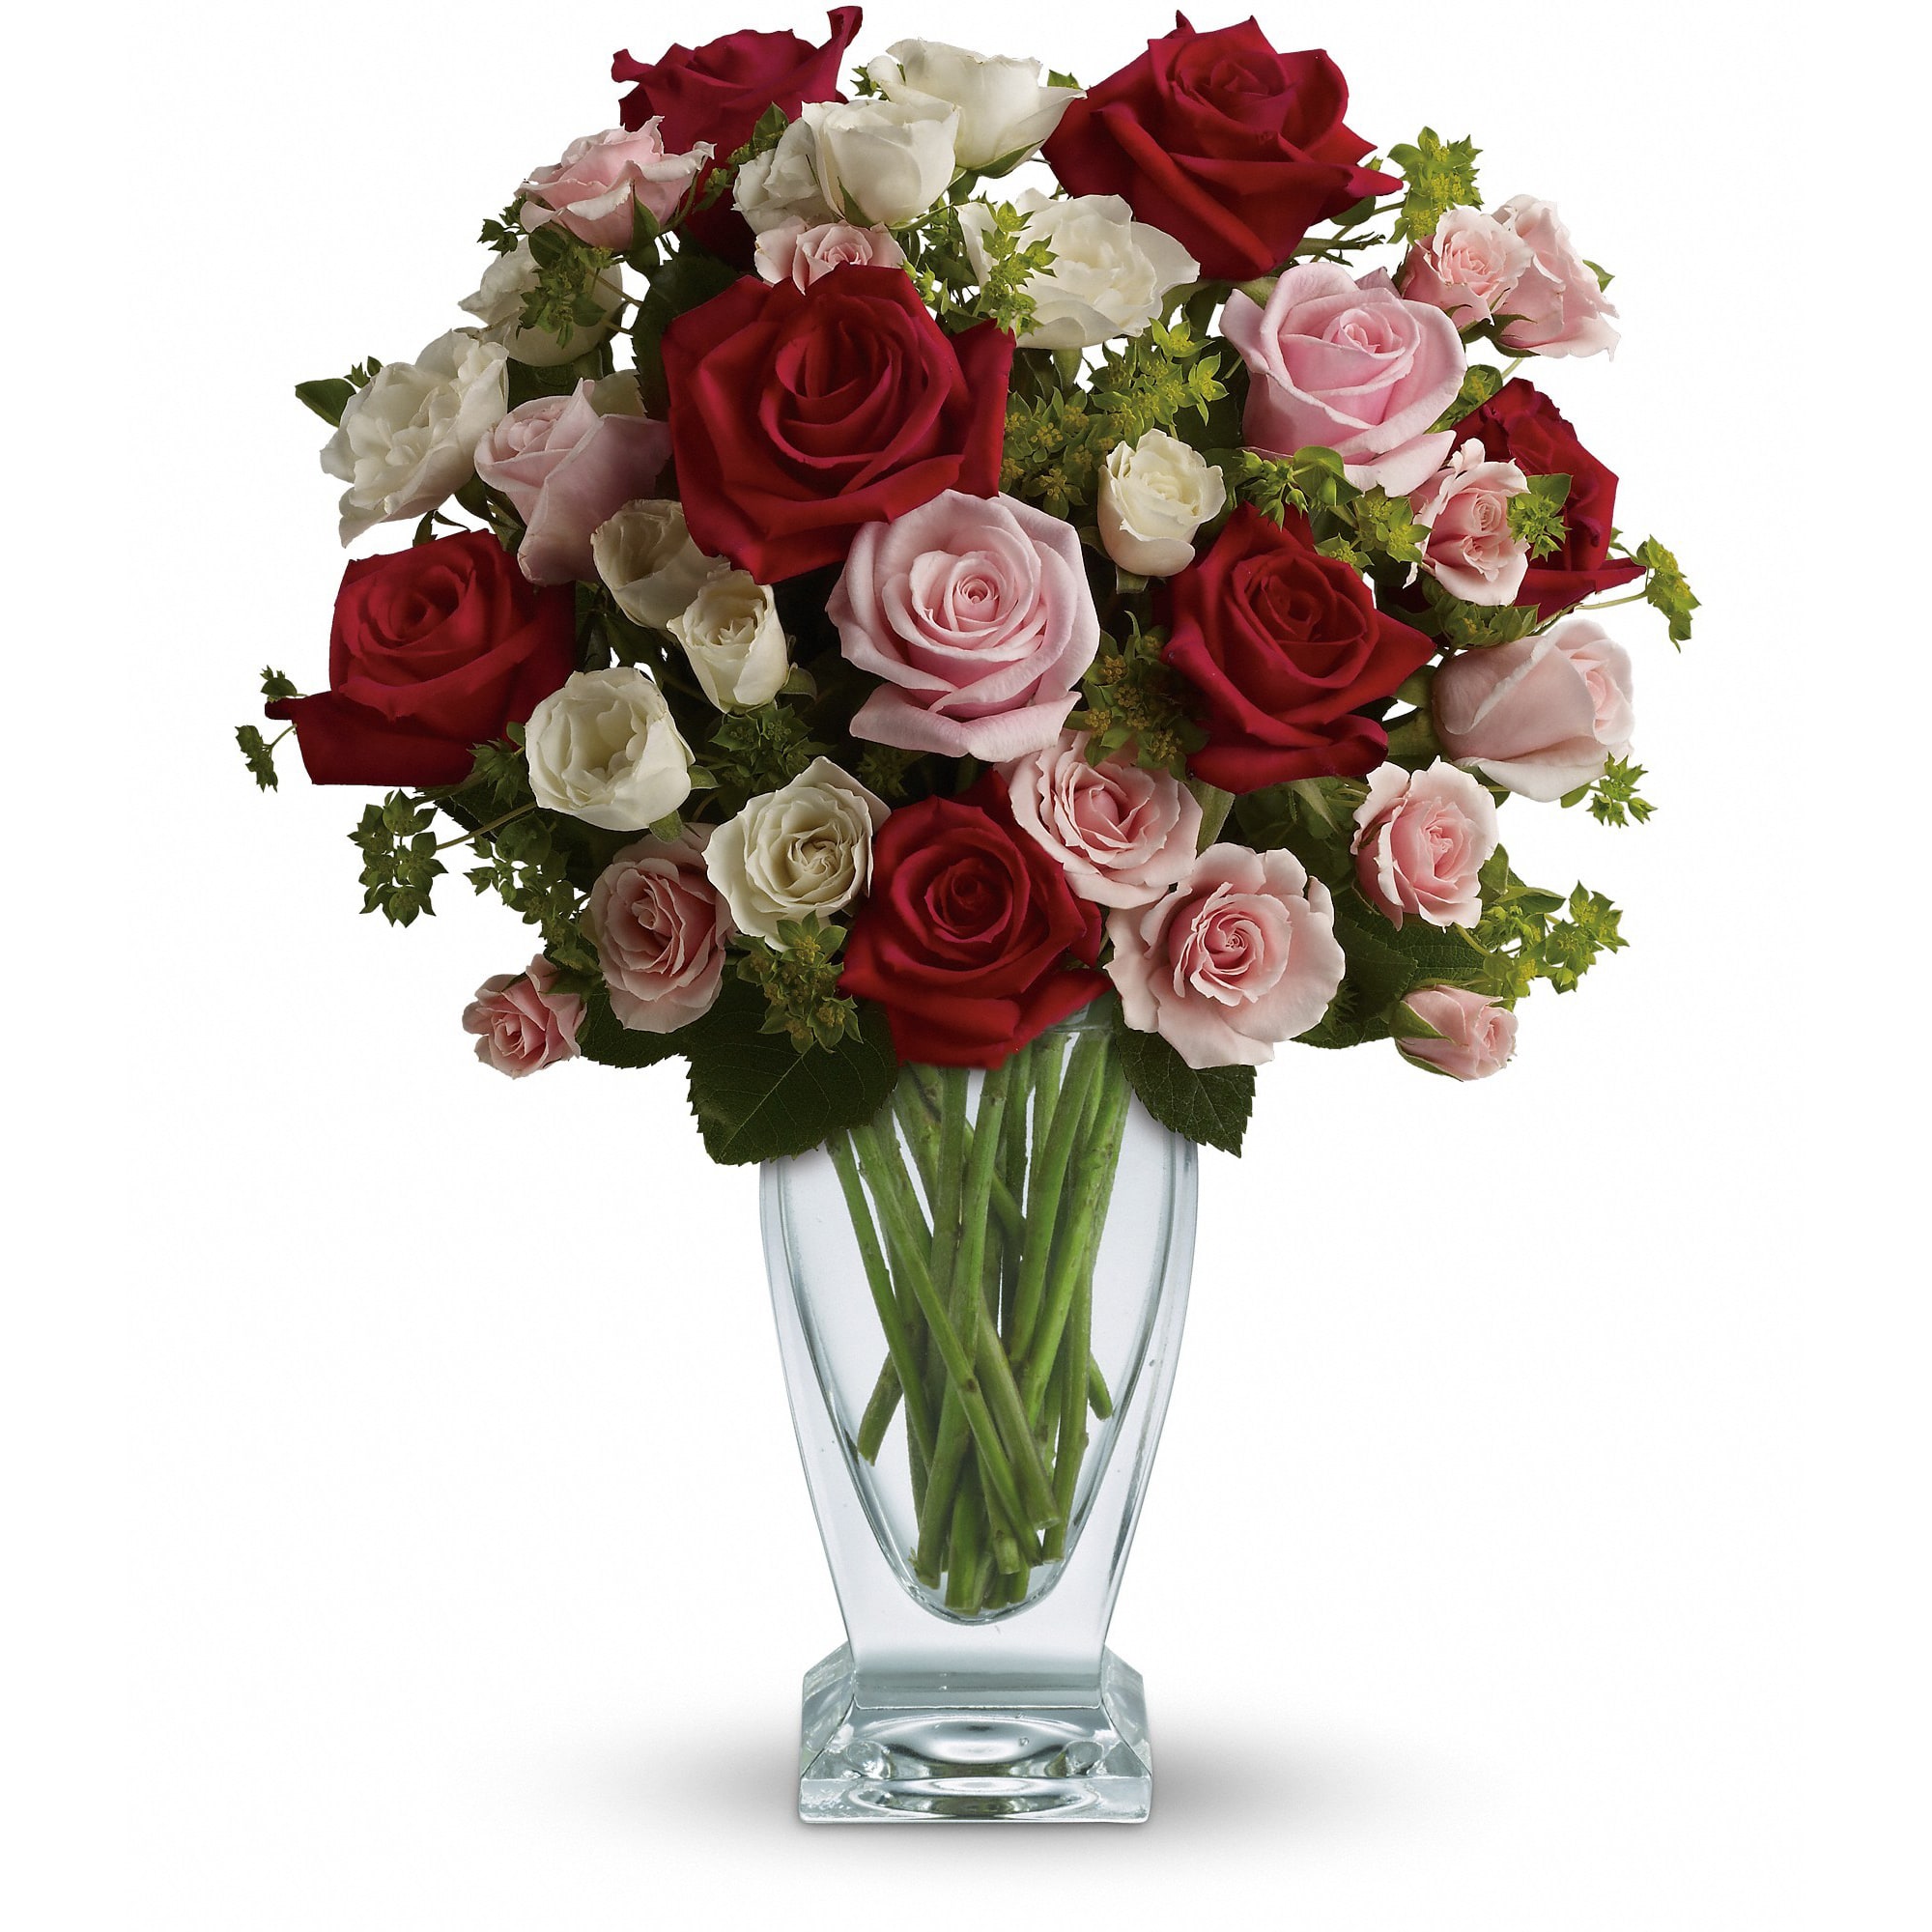 Cupid's Creation with Red Roses by Teleflora  - Classic beauty and romance to spare, thanks to the graceful lines of a Couture Vase filled with stunning roses - the iconic flower of love. Like the arrow released from Cupid's bow, this gorgeous bouquet will go straight to your lover's heart.  Exquisite red and pink roses, white and light pink spray roses and greens are perfectly arranged in a lovely Couture Vase. This is an inspired way to celebrate your love.  Approximately 8&quot; W x 14&quot; H  Orientation: All-Around      As Shown : T6-1A     Deluxe : T6-1B     Premium : T6-1C  